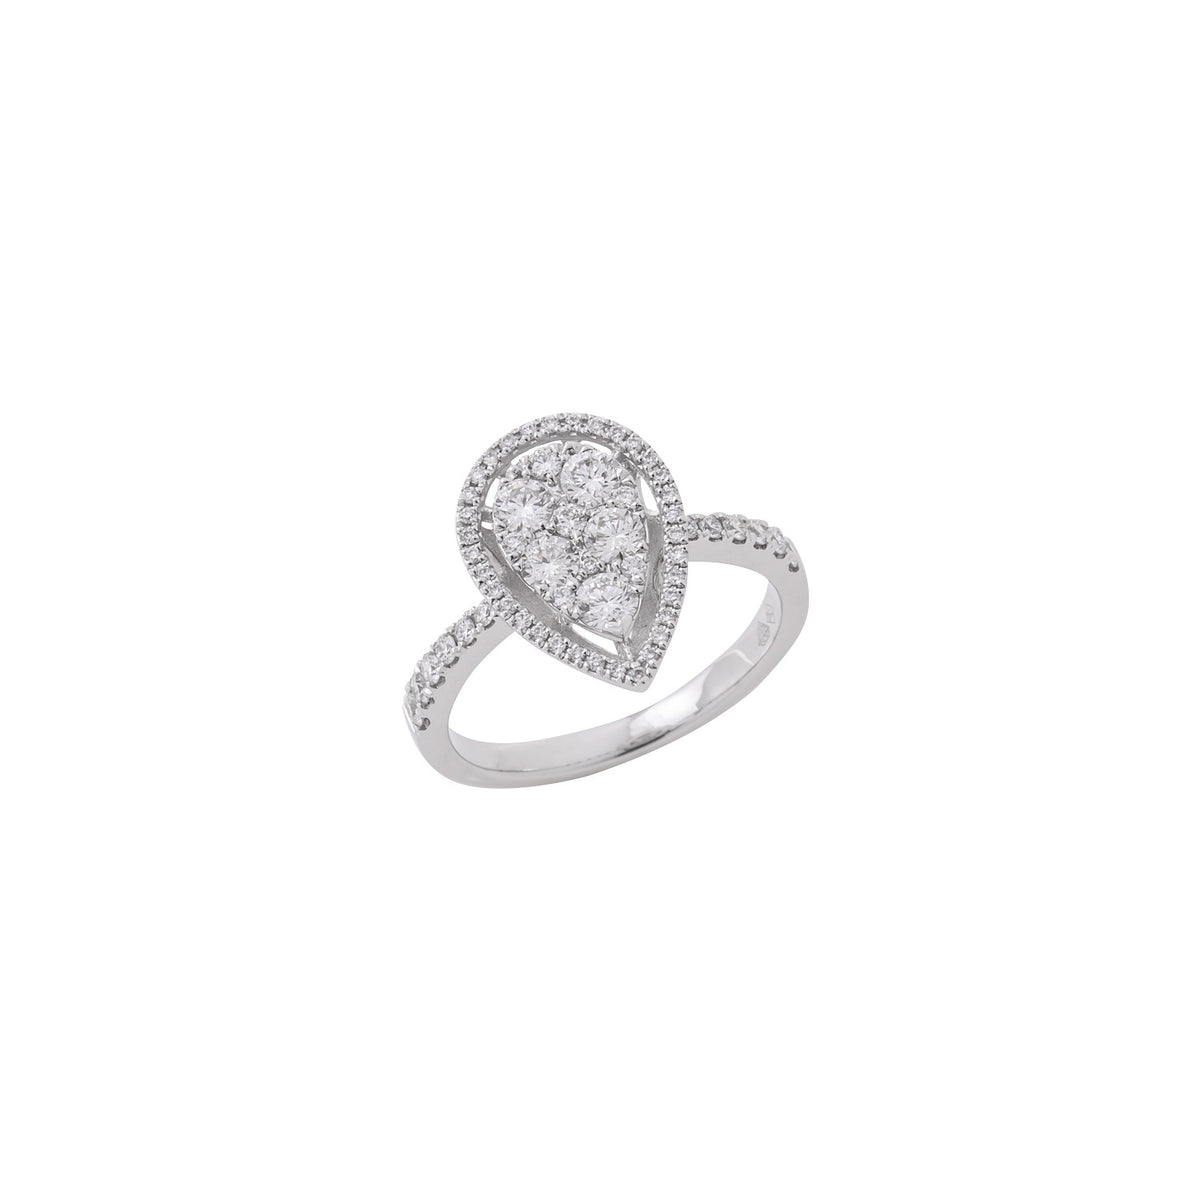 A fashionable high-end ring made with rare diamonds. The rings in this collection are stunners and are a great addition to a beautiful collection of jewelry. Let these beautiful pieces capture your heart. Pear shape diamond ring. Engagement ring.